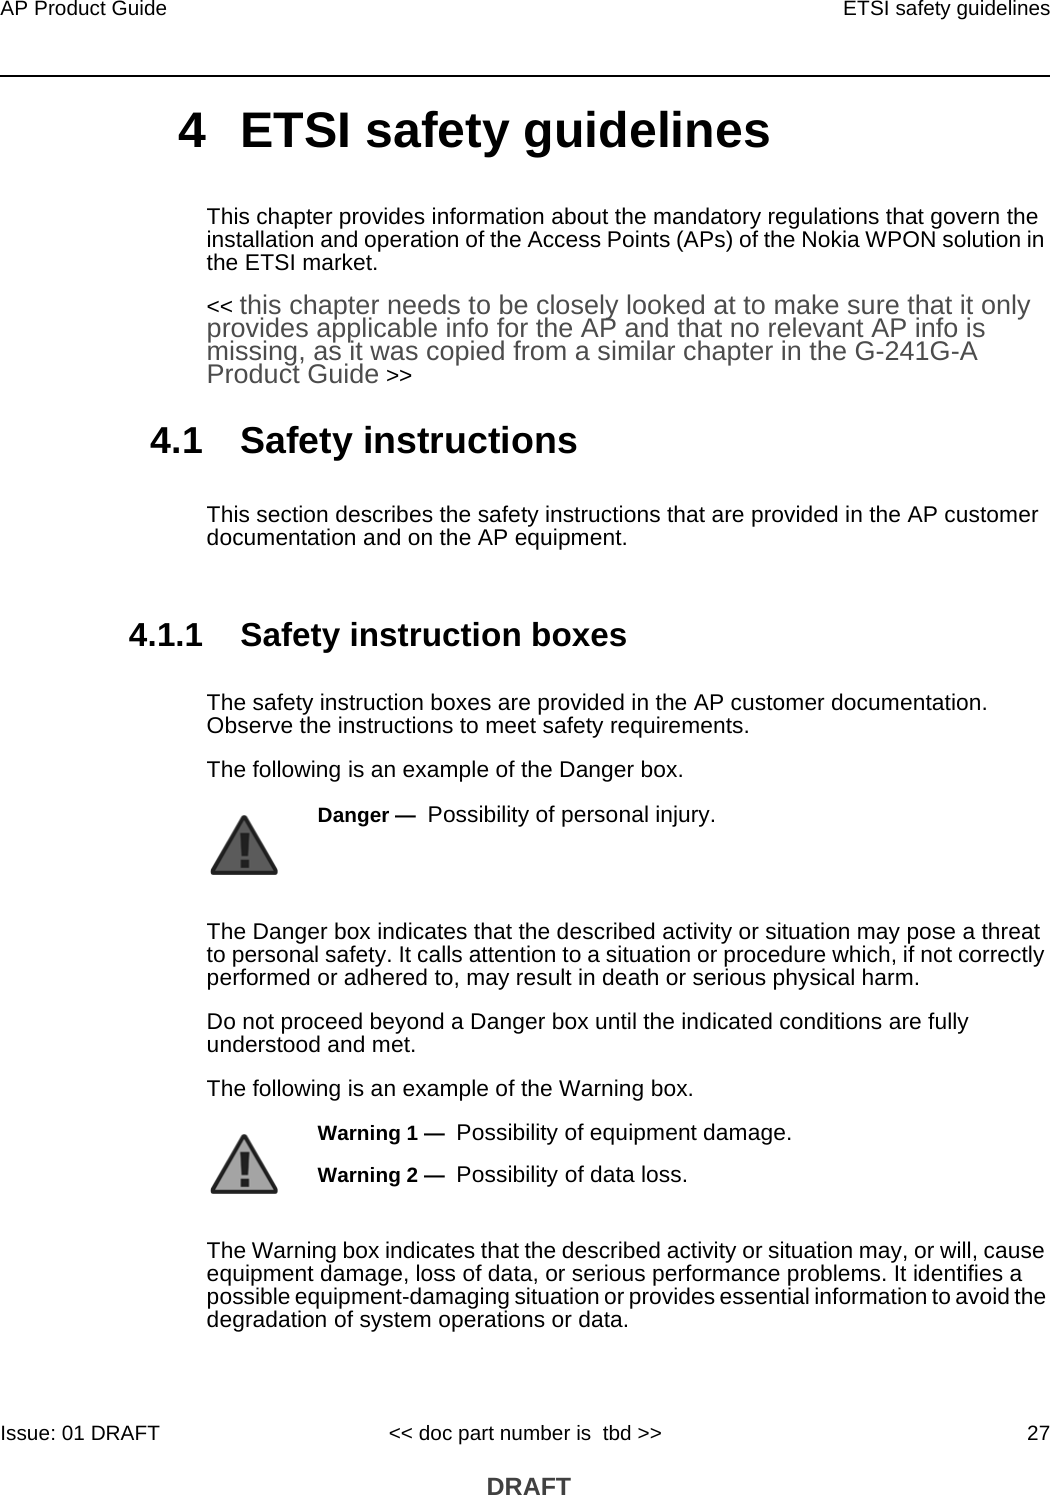 AP Product Guide ETSI safety guidelinesIssue: 01 DRAFT &lt;&lt; doc part number is  tbd &gt;&gt; 27 DRAFT4 ETSI safety guidelinesThis chapter provides information about the mandatory regulations that govern the installation and operation of the Access Points (APs) of the Nokia WPON solution in the ETSI market.&lt;&lt; this chapter needs to be closely looked at to make sure that it only provides applicable info for the AP and that no relevant AP info is missing, as it was copied from a similar chapter in the G-241G-A Product Guide &gt;&gt;4.1 Safety instructionsThis section describes the safety instructions that are provided in the AP customer documentation and on the AP equipment.4.1.1 Safety instruction boxesThe safety instruction boxes are provided in the AP customer documentation. Observe the instructions to meet safety requirements.The following is an example of the Danger box.The Danger box indicates that the described activity or situation may pose a threat to personal safety. It calls attention to a situation or procedure which, if not correctly performed or adhered to, may result in death or serious physical harm. Do not proceed beyond a Danger box until the indicated conditions are fully understood and met.The following is an example of the Warning box.The Warning box indicates that the described activity or situation may, or will, cause equipment damage, loss of data, or serious performance problems. It identifies a possible equipment-damaging situation or provides essential information to avoid the degradation of system operations or data.Danger —  Possibility of personal injury. Warning 1 —  Possibility of equipment damage.Warning 2 —  Possibility of data loss.